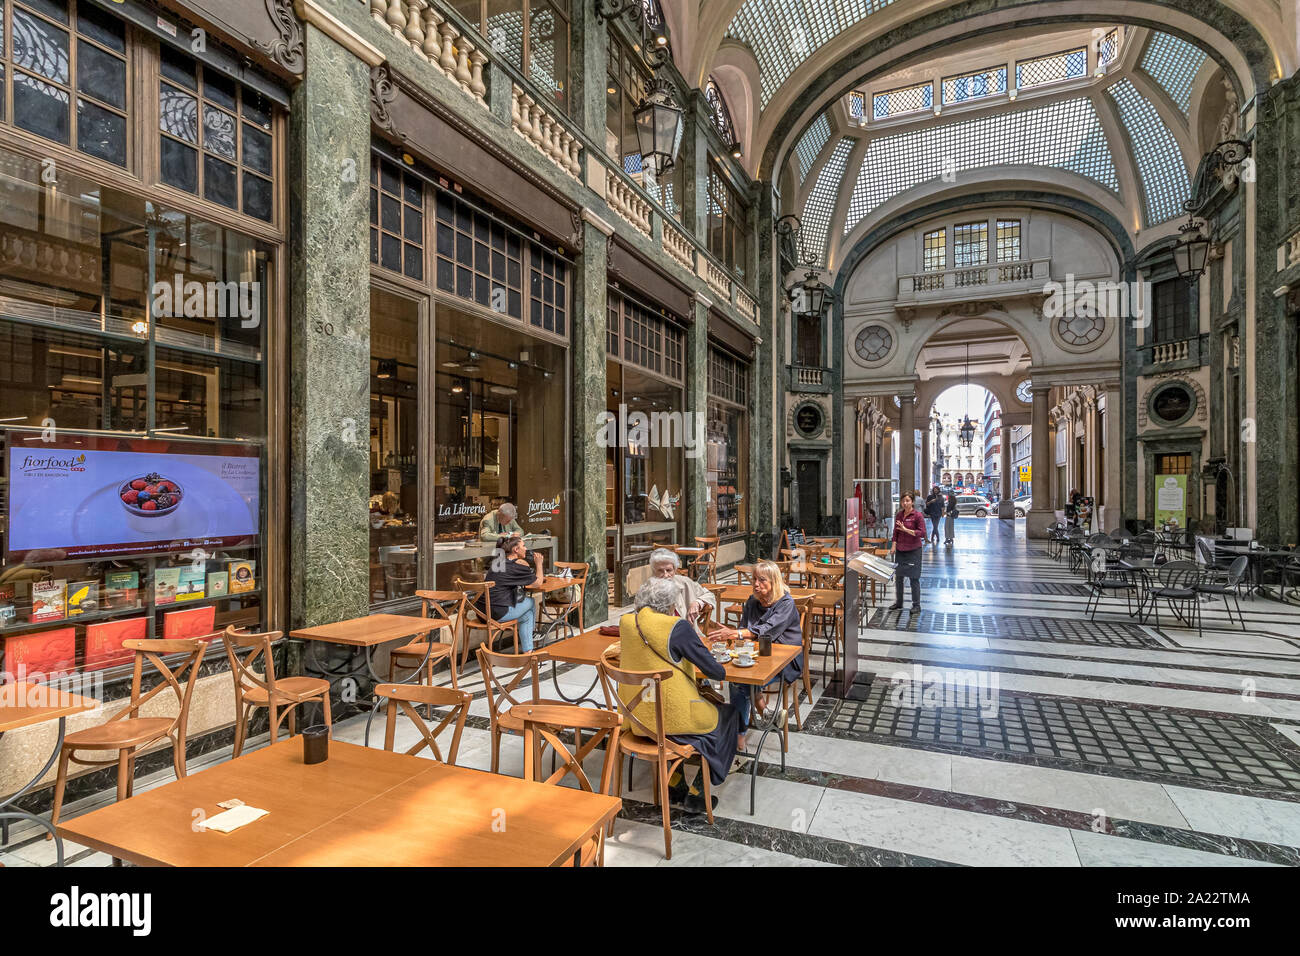 People sitting at tables eating food in the indoor ,art deco,glass ceilinged  arcade ,Galleria San Federico in Turin ,Italy Stock Photo